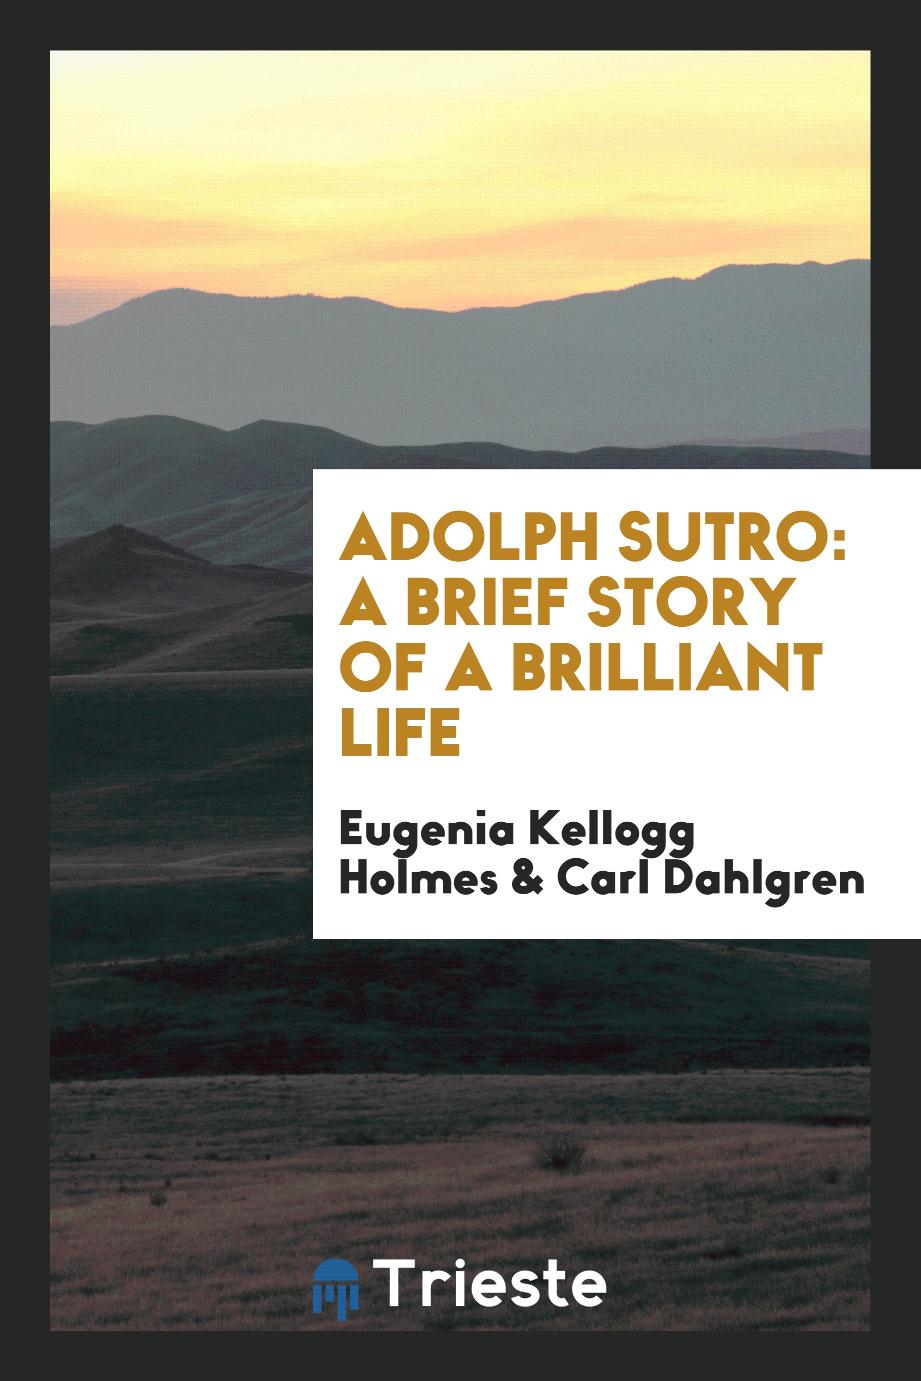 Adolph Sutro: A Brief Story of a Brilliant Life